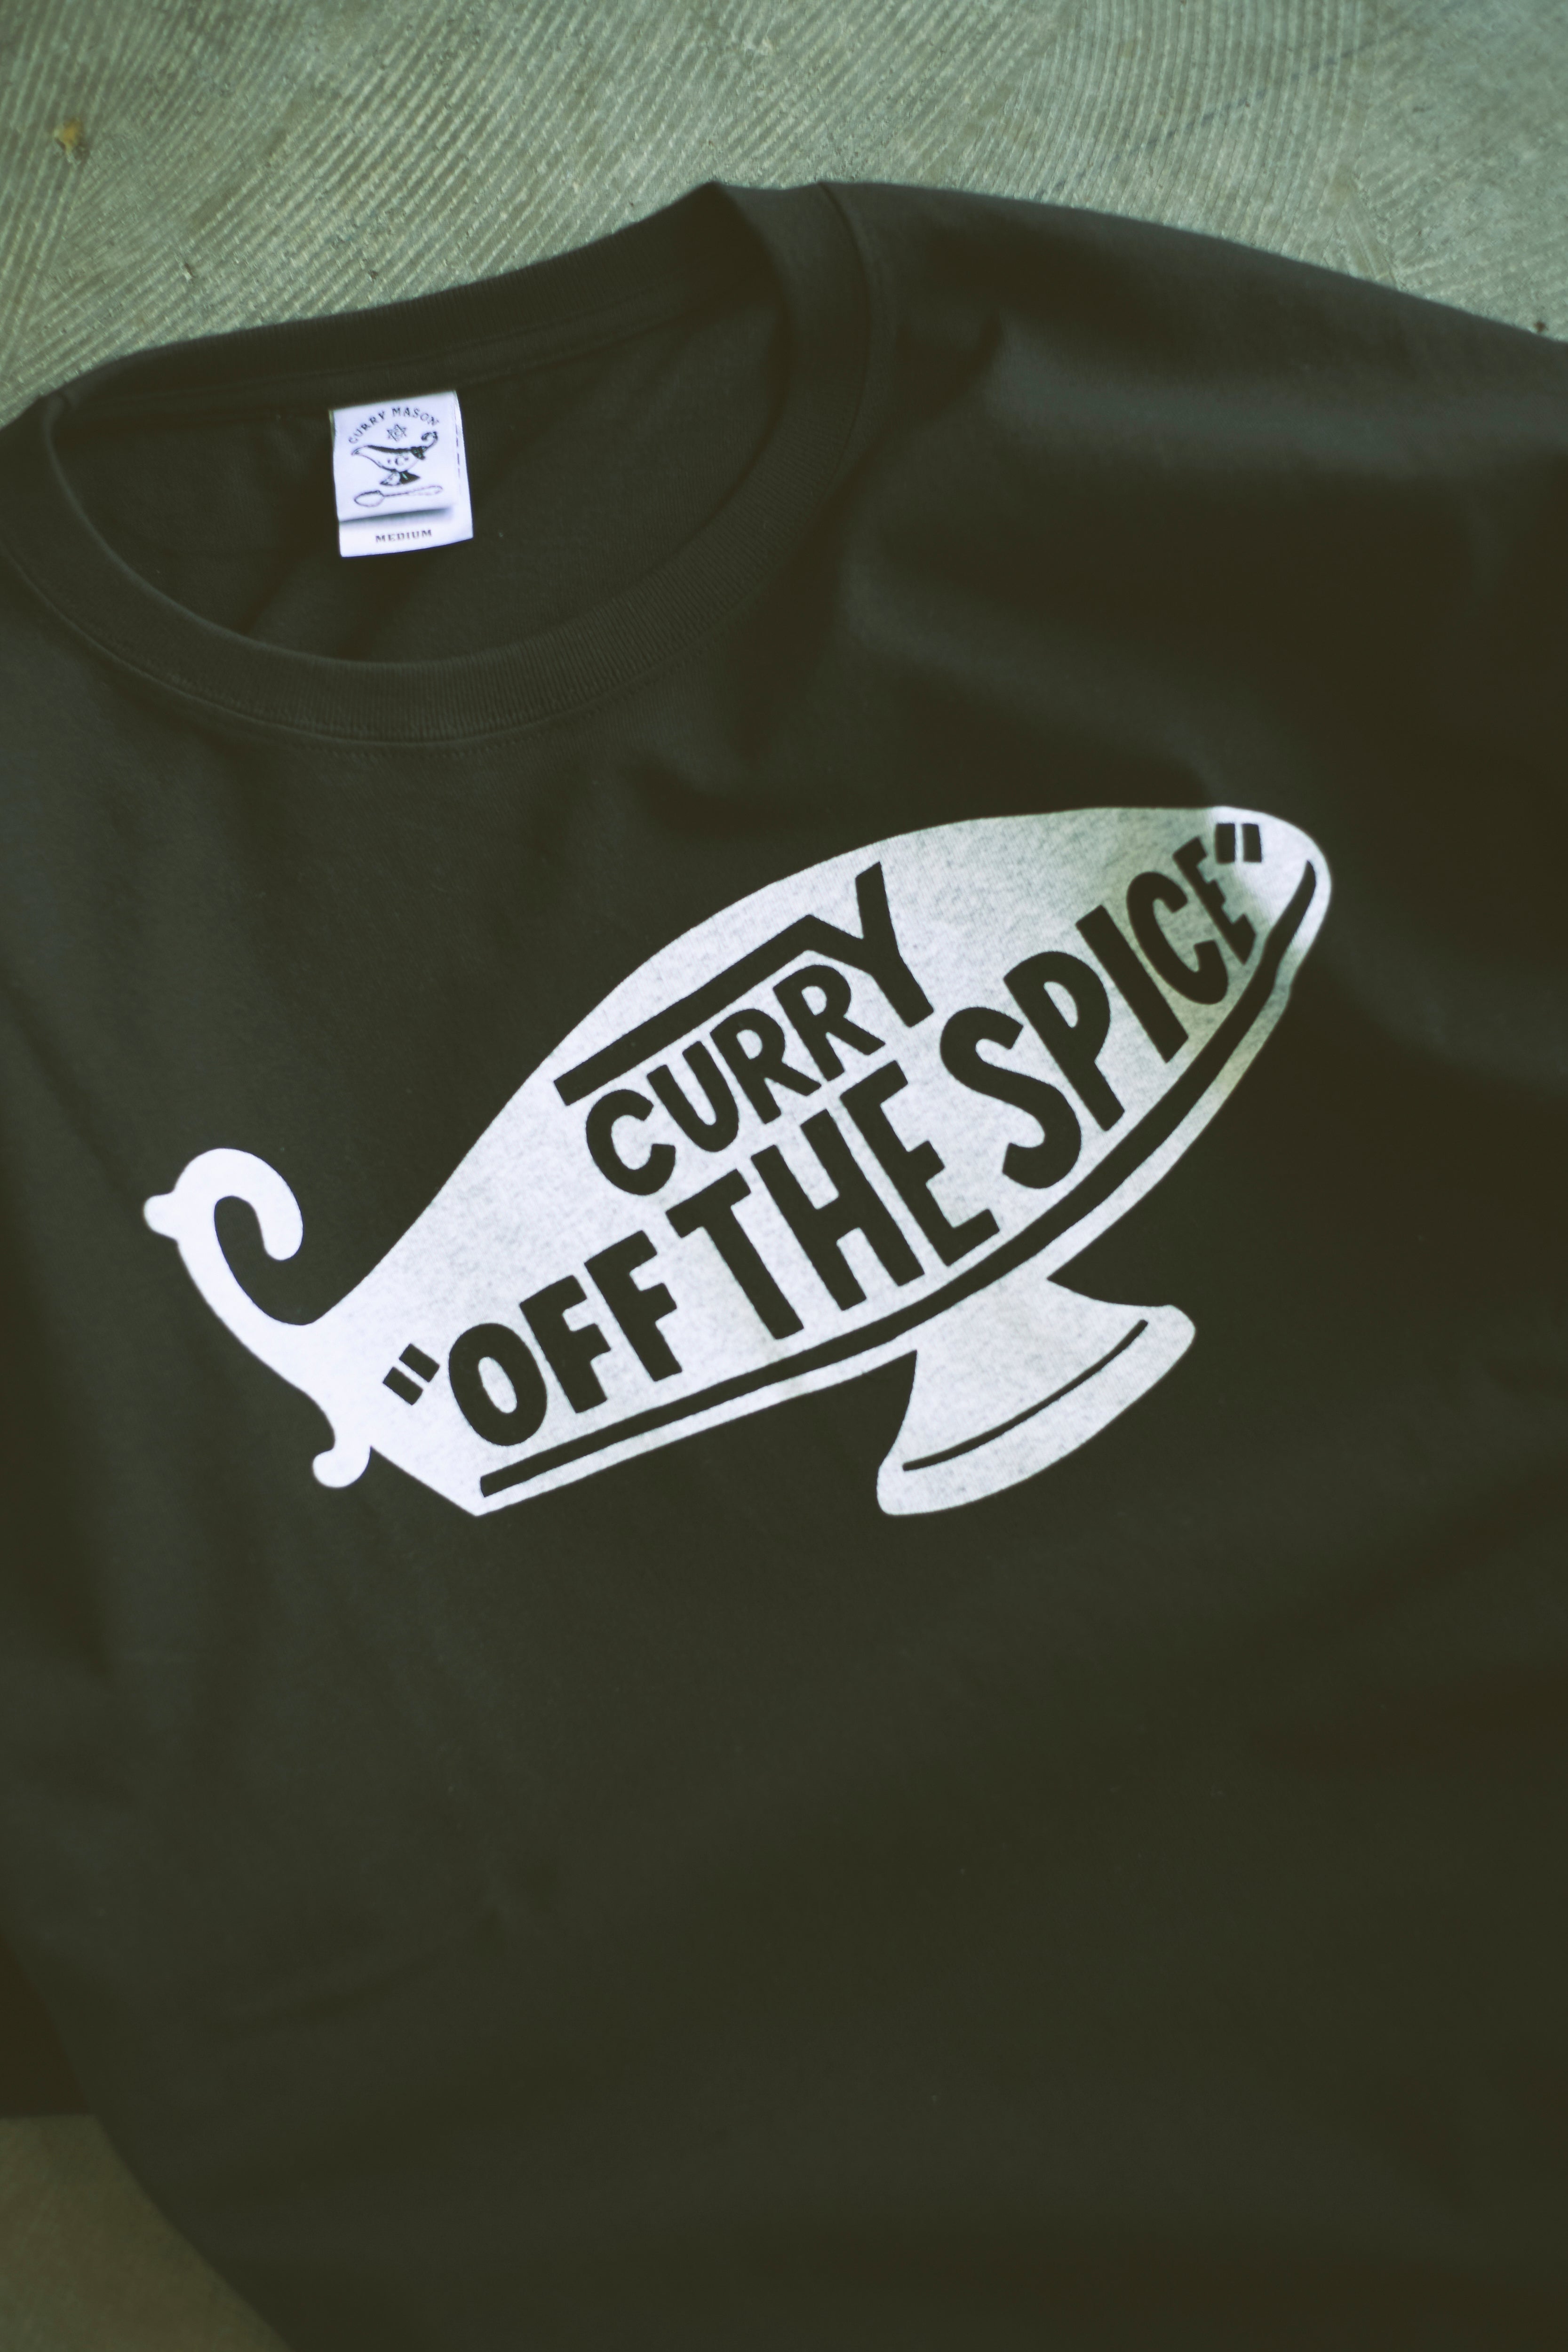 CURRYMAYSON / OFF THE SPICE 23